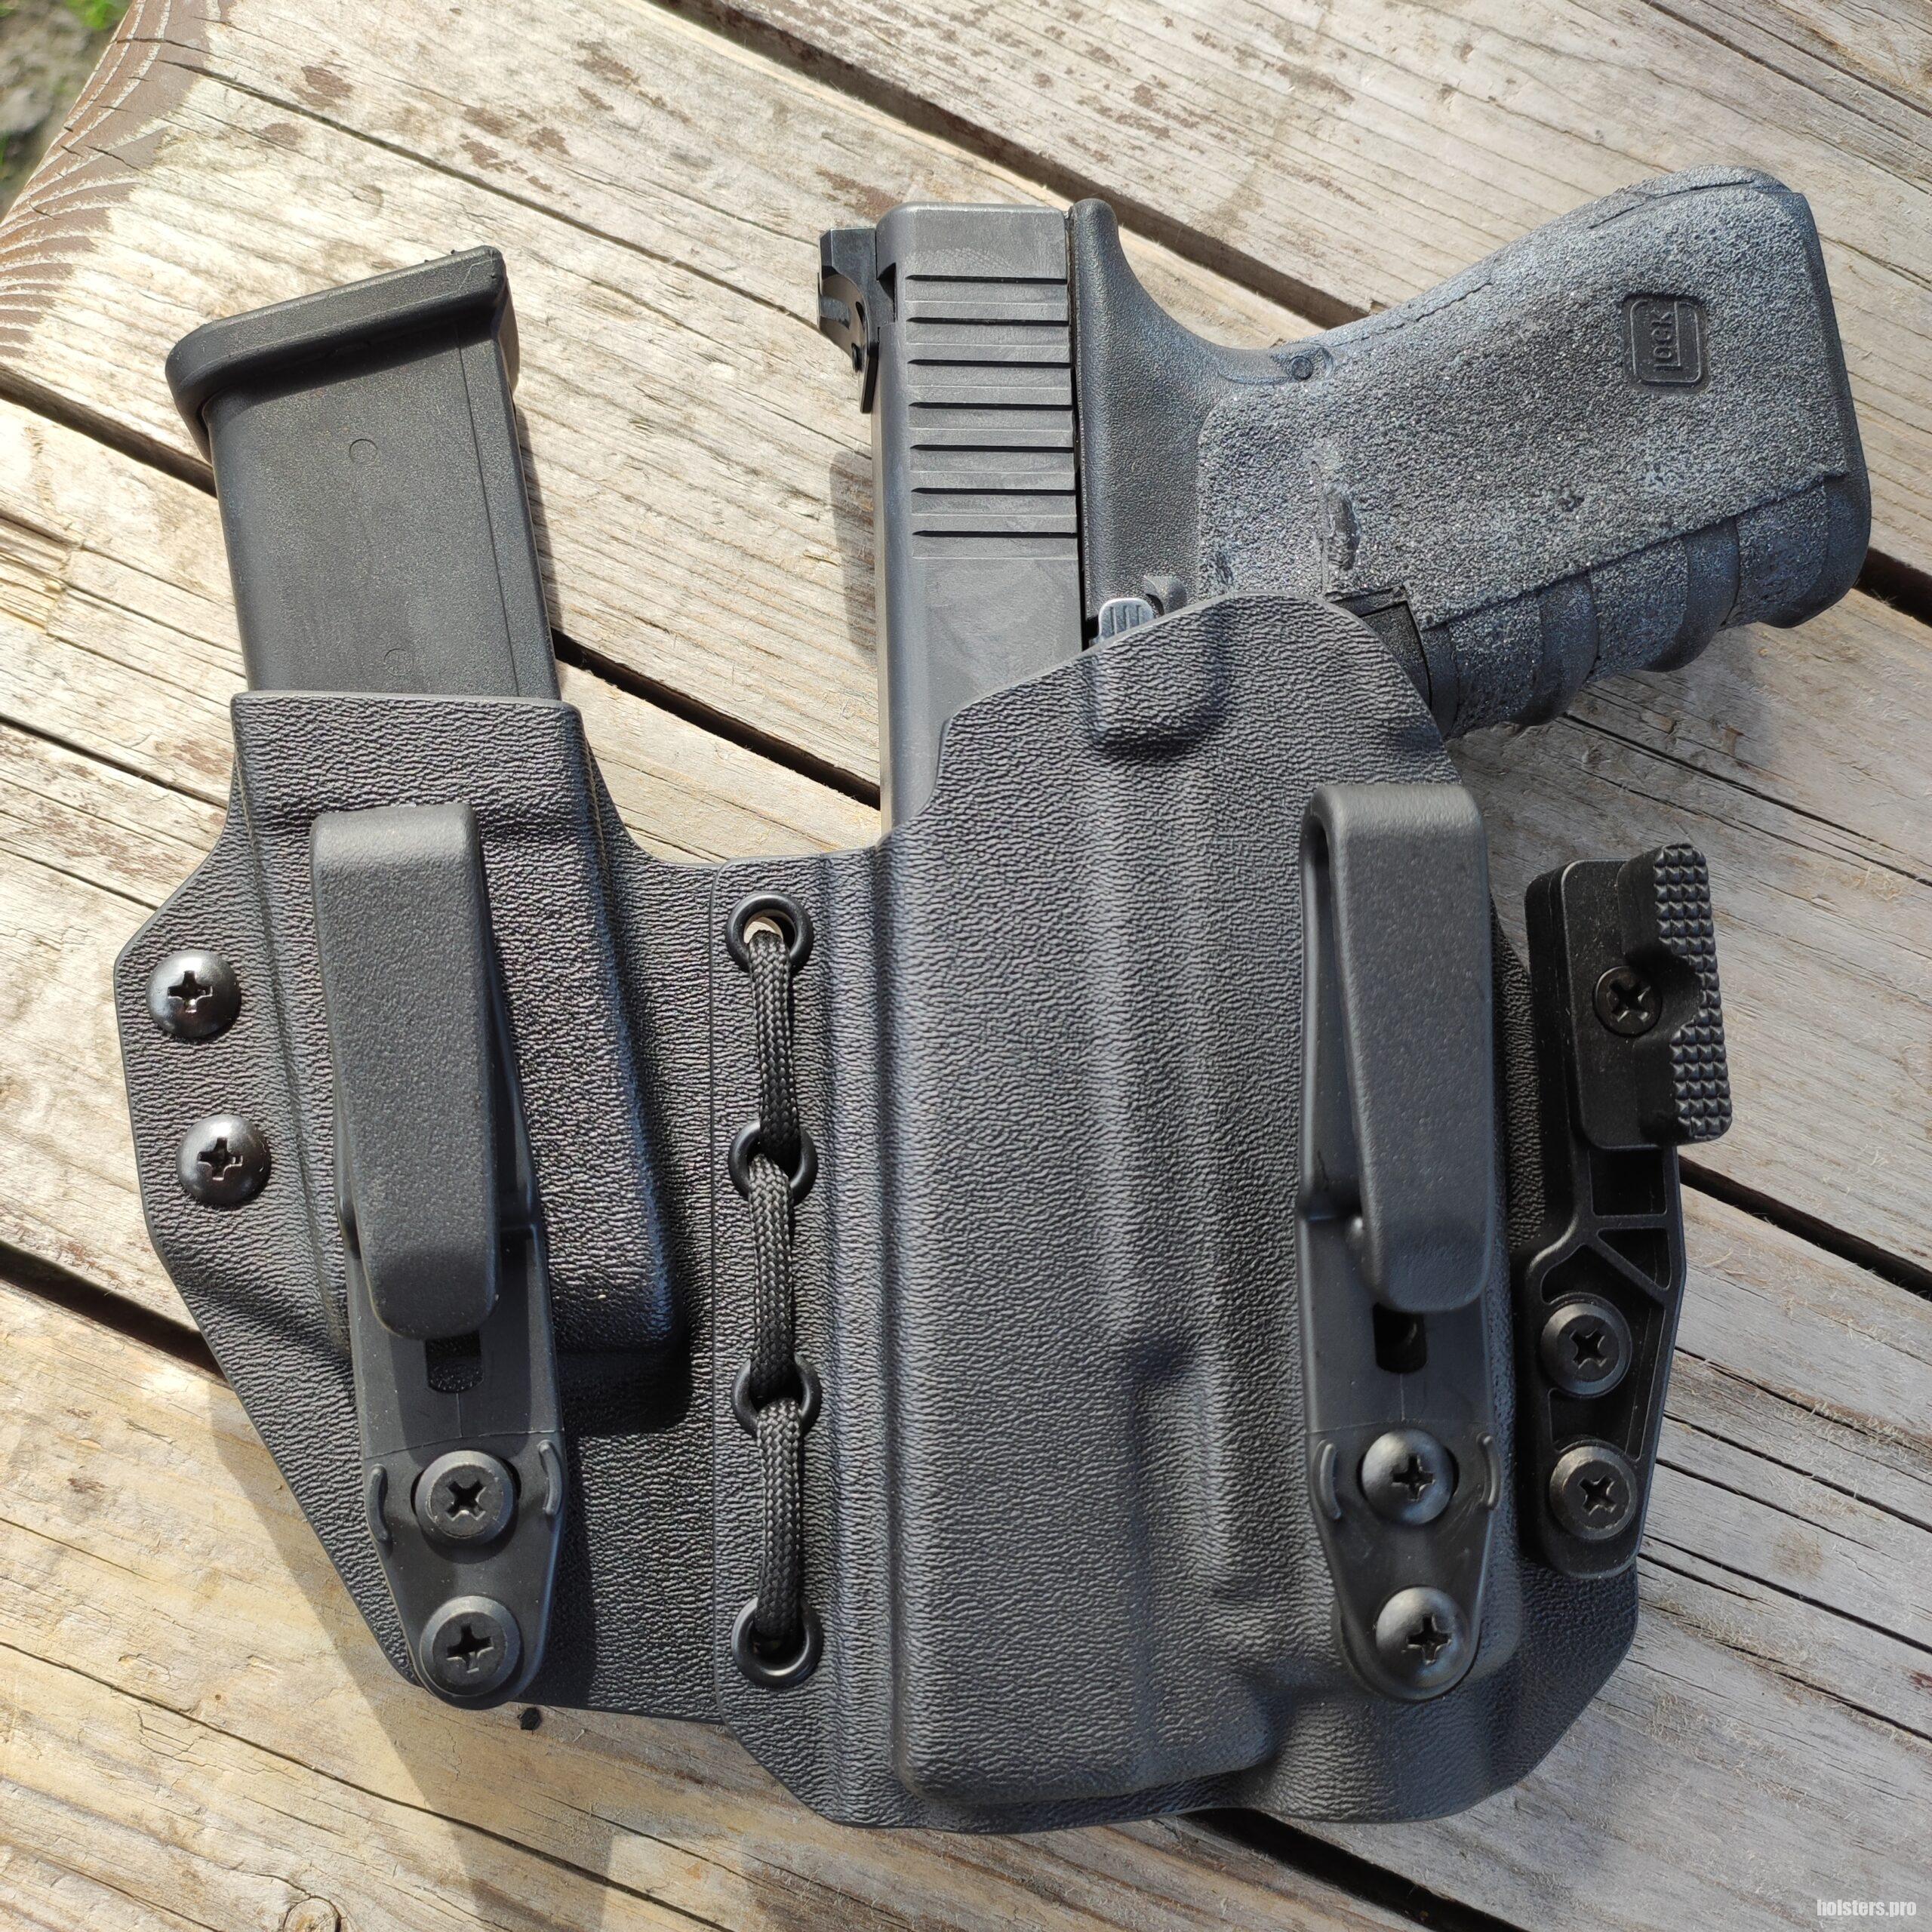 Ember - AIWB/IWB Light bearing holster for sub-compact concealed